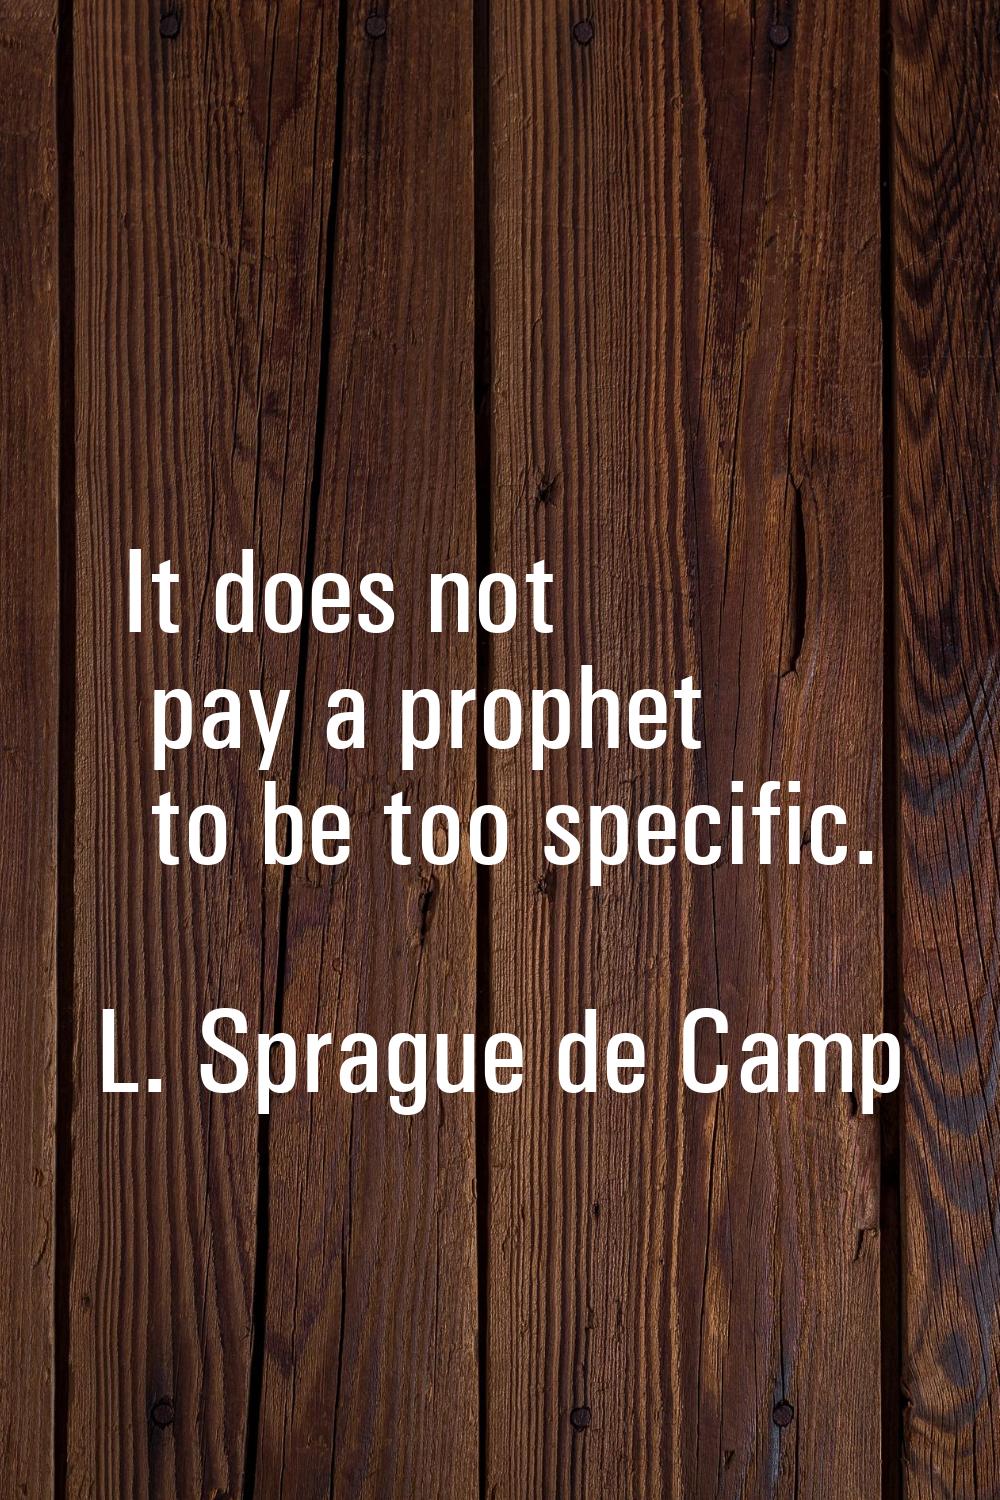 It does not pay a prophet to be too specific.